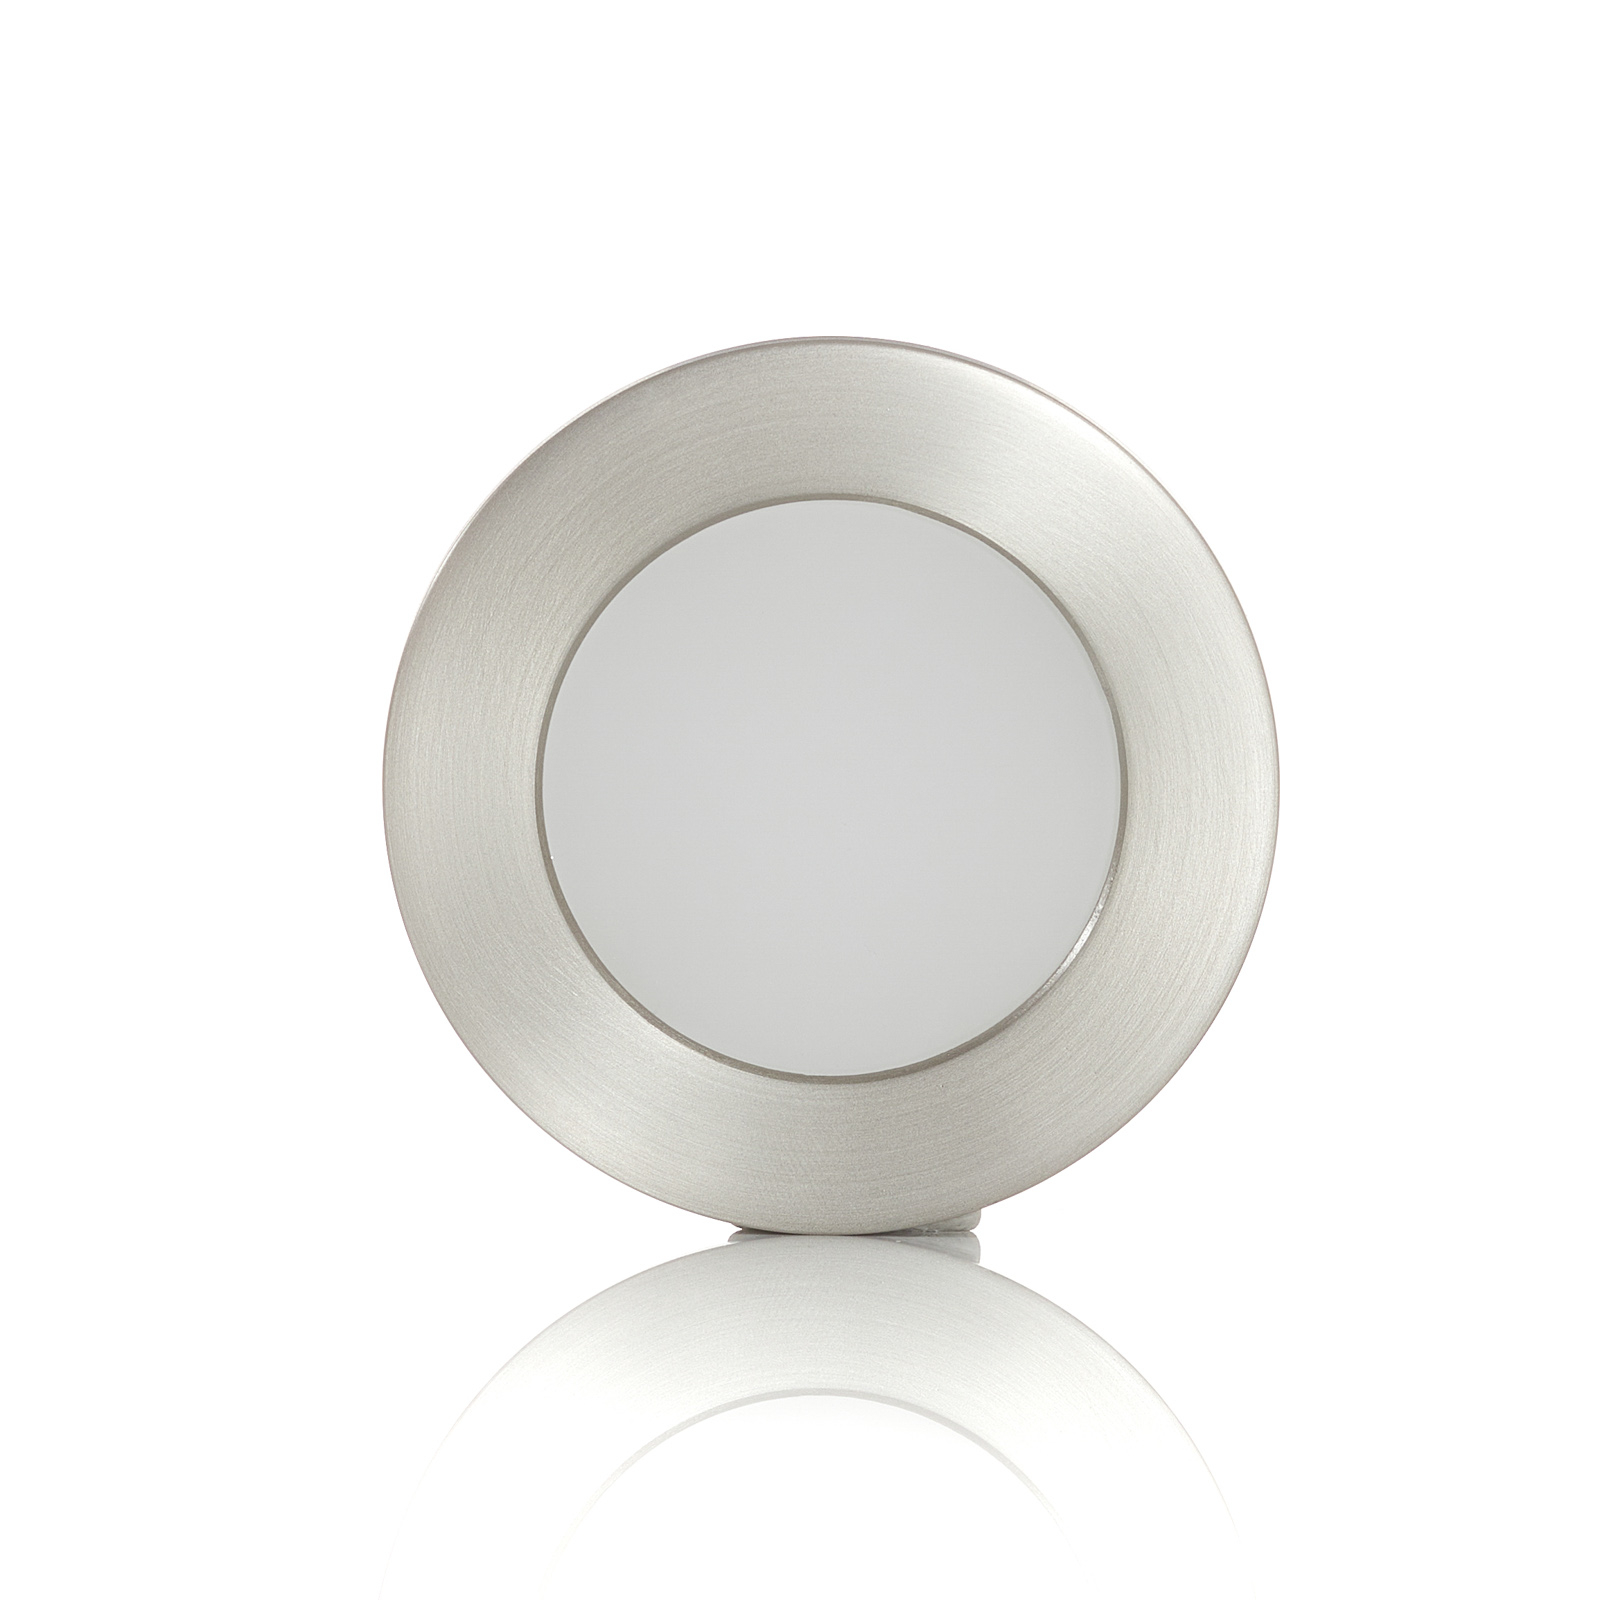 BEGA Accenta wall lamp round frame steel 315lm